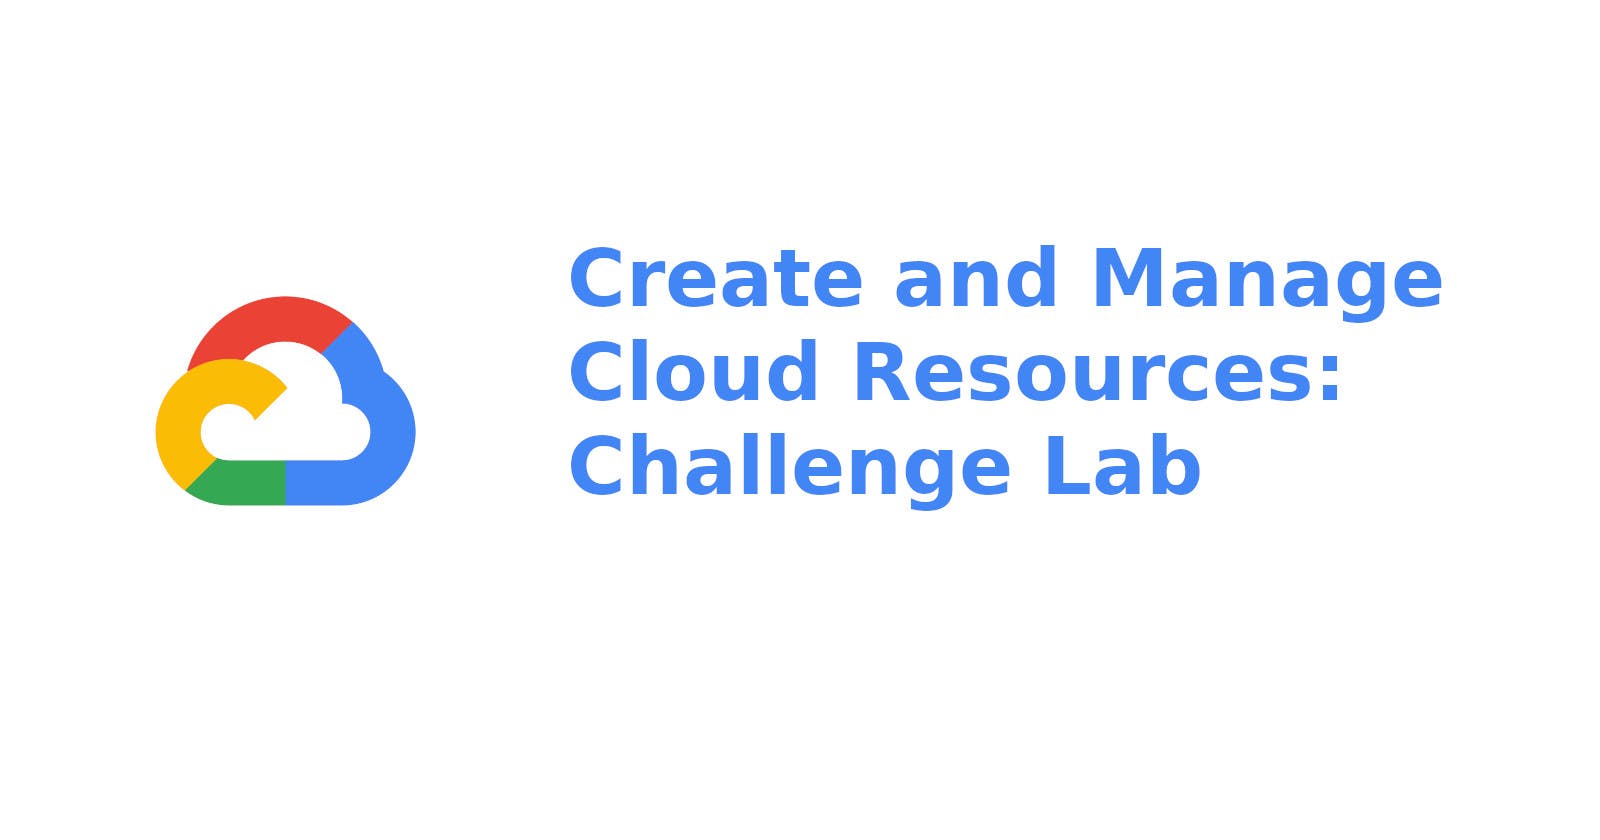 Create and Manage Cloud Resources: Challenge Lab